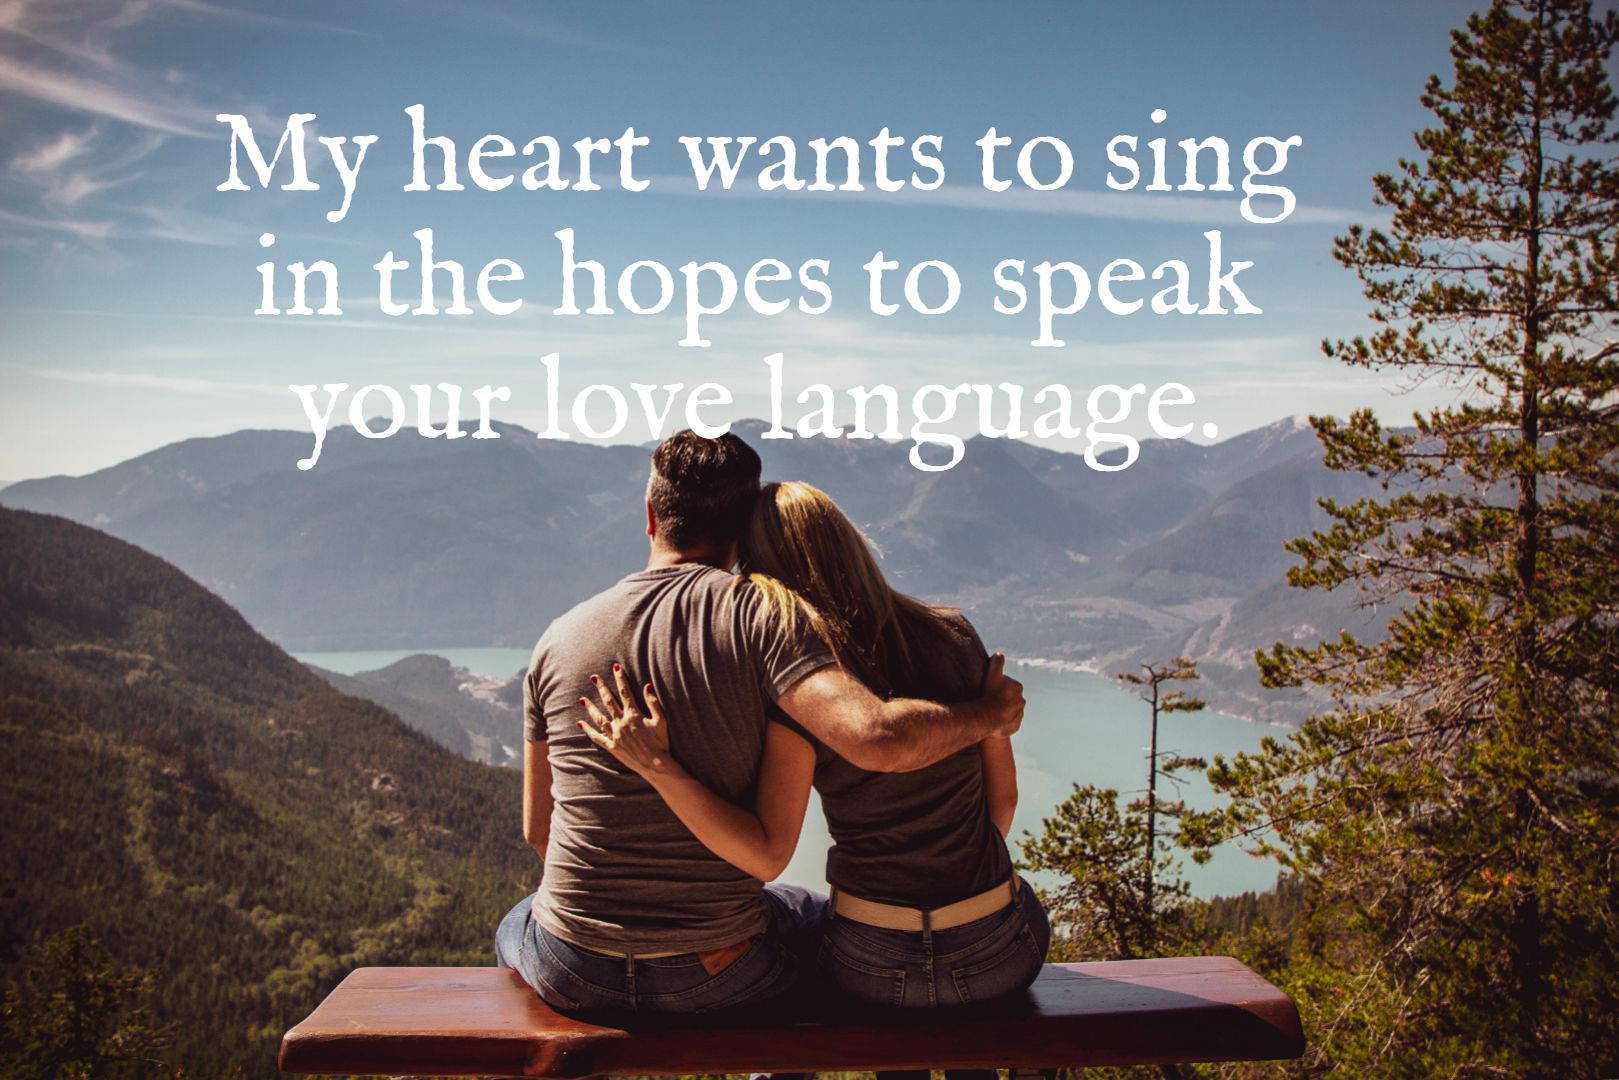 Relationship Quotes With Images
 I will Design 20 Unique Love & Relationship Quotes for $5